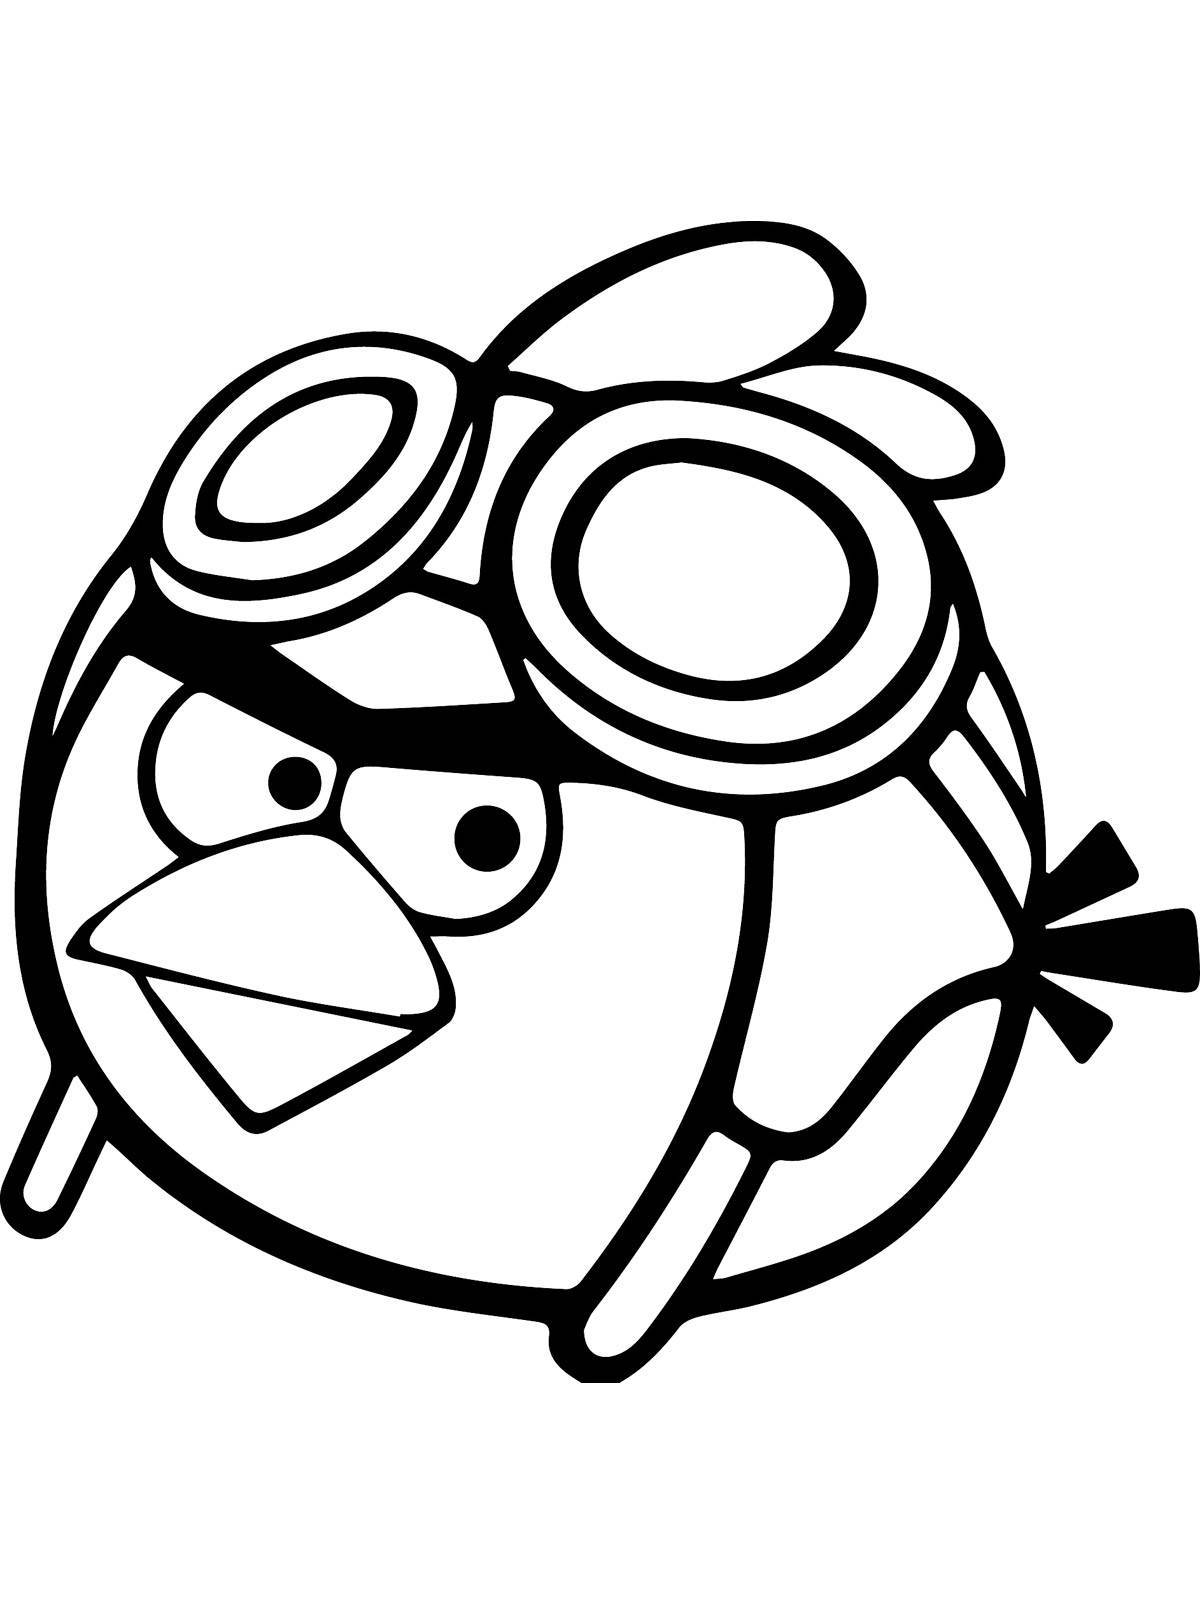 Sparkling angry birds coloring book